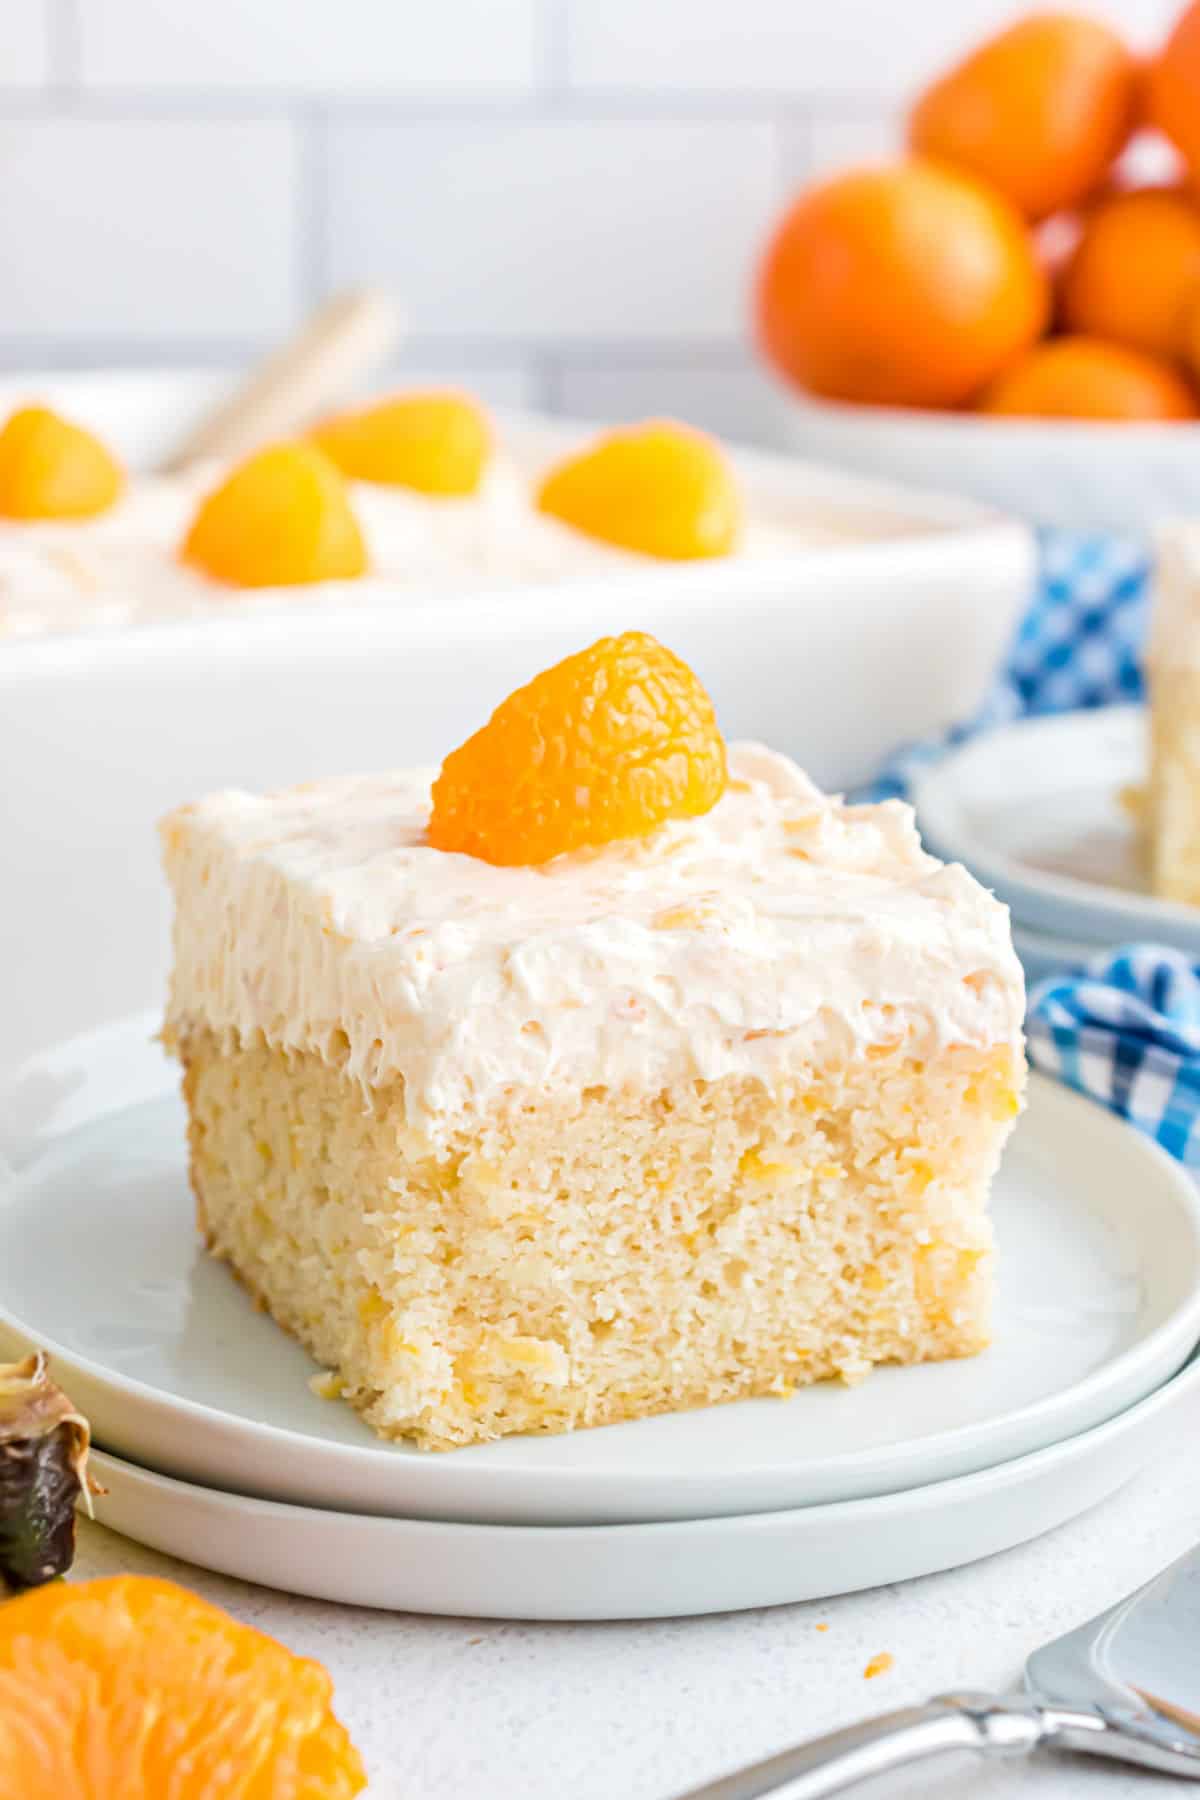 Slice of pineapple cake with whipped cream frosting and mandarin oranges.